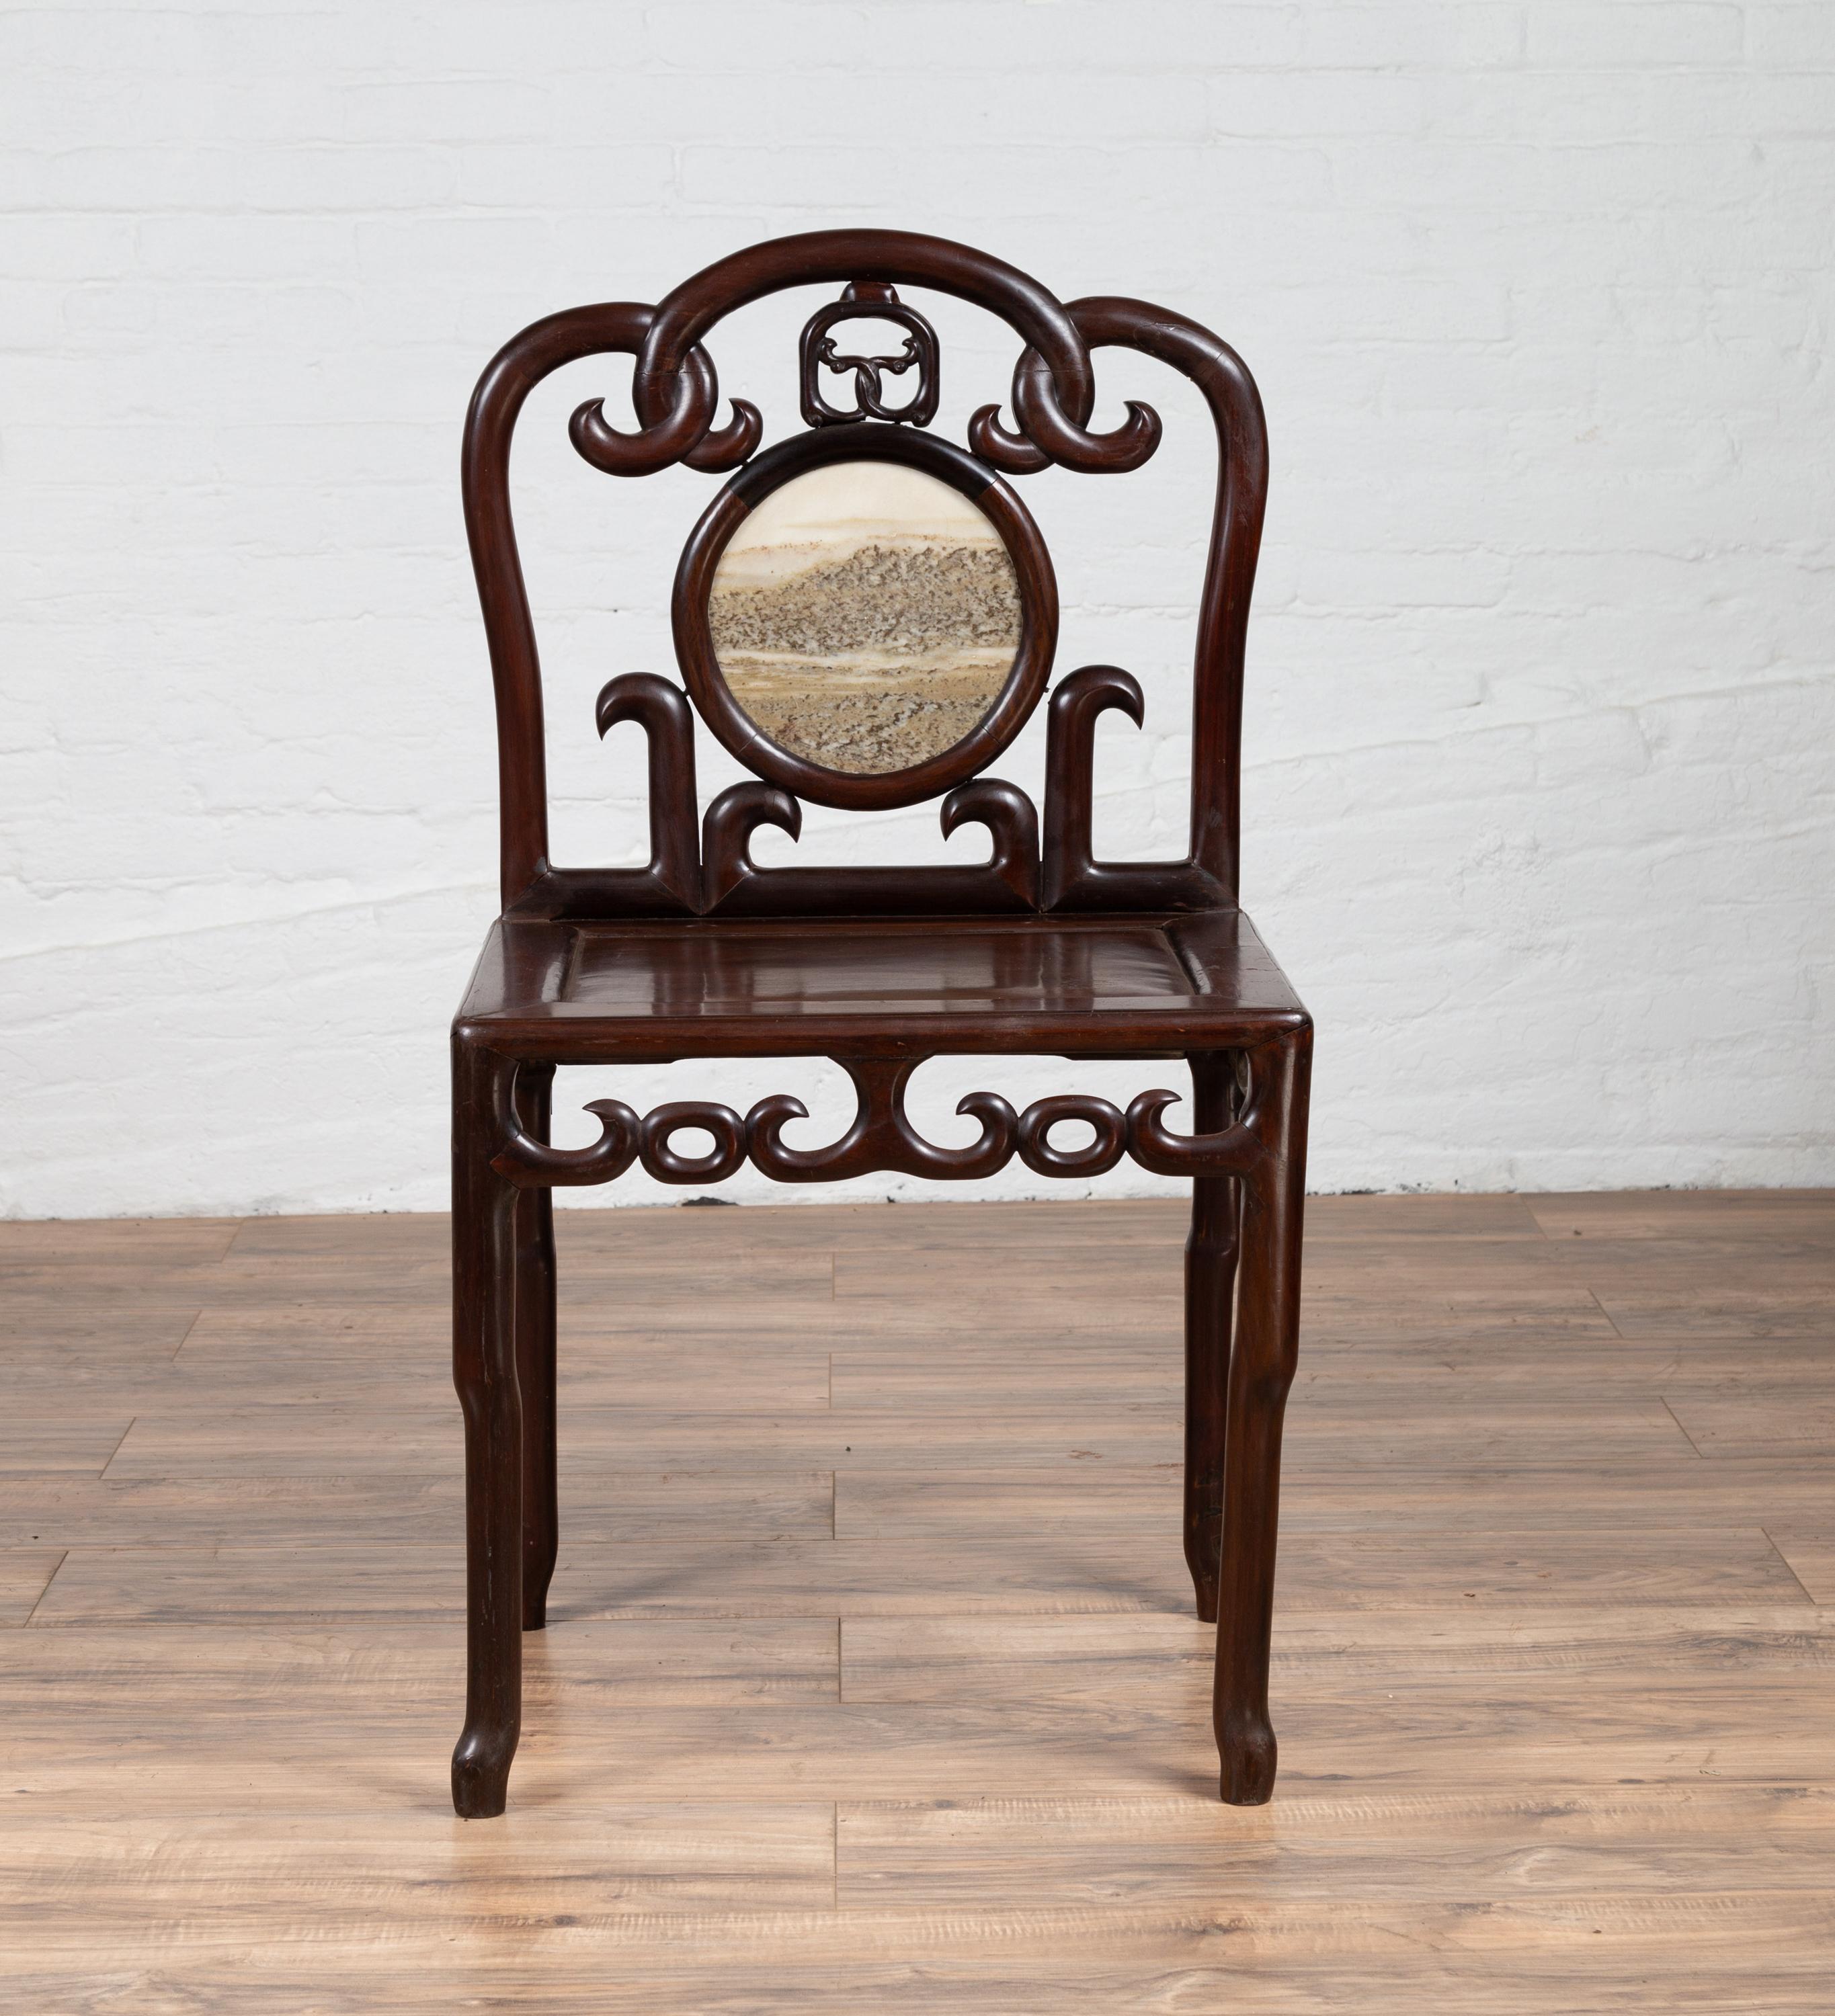 A late Qing Dynasty period rosewood side chair from the early 20th century, with marble medallion inlay and open fretwork. Crafted during the early years of the 20th century, this exquisite late Qing Dynasty period rosewood side chair captures the